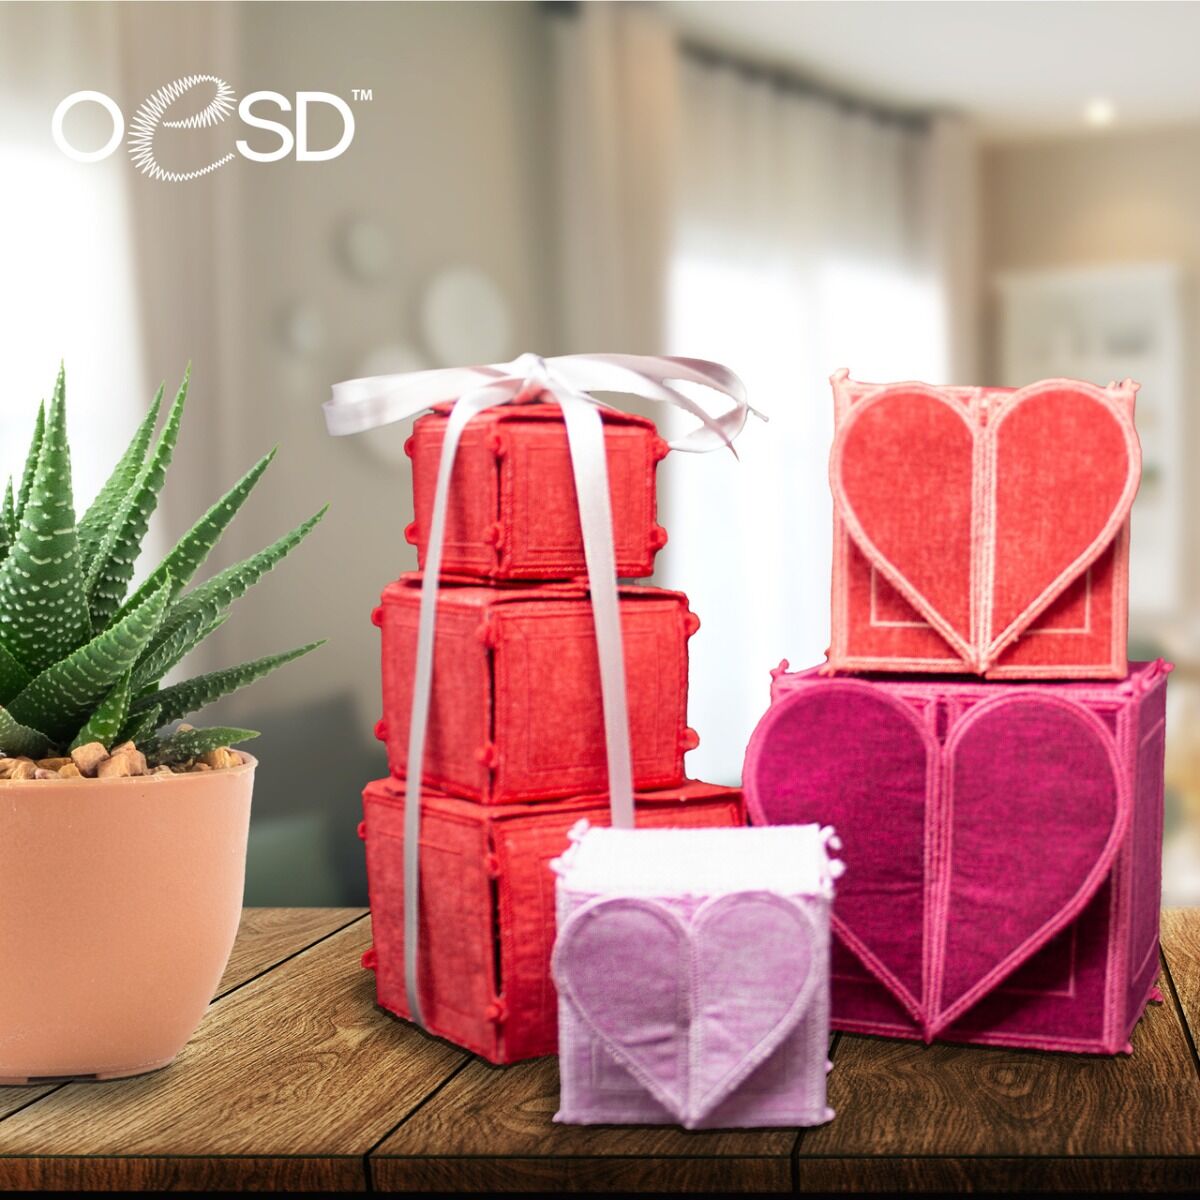 OESD Freestanding Heart Gift Boxes